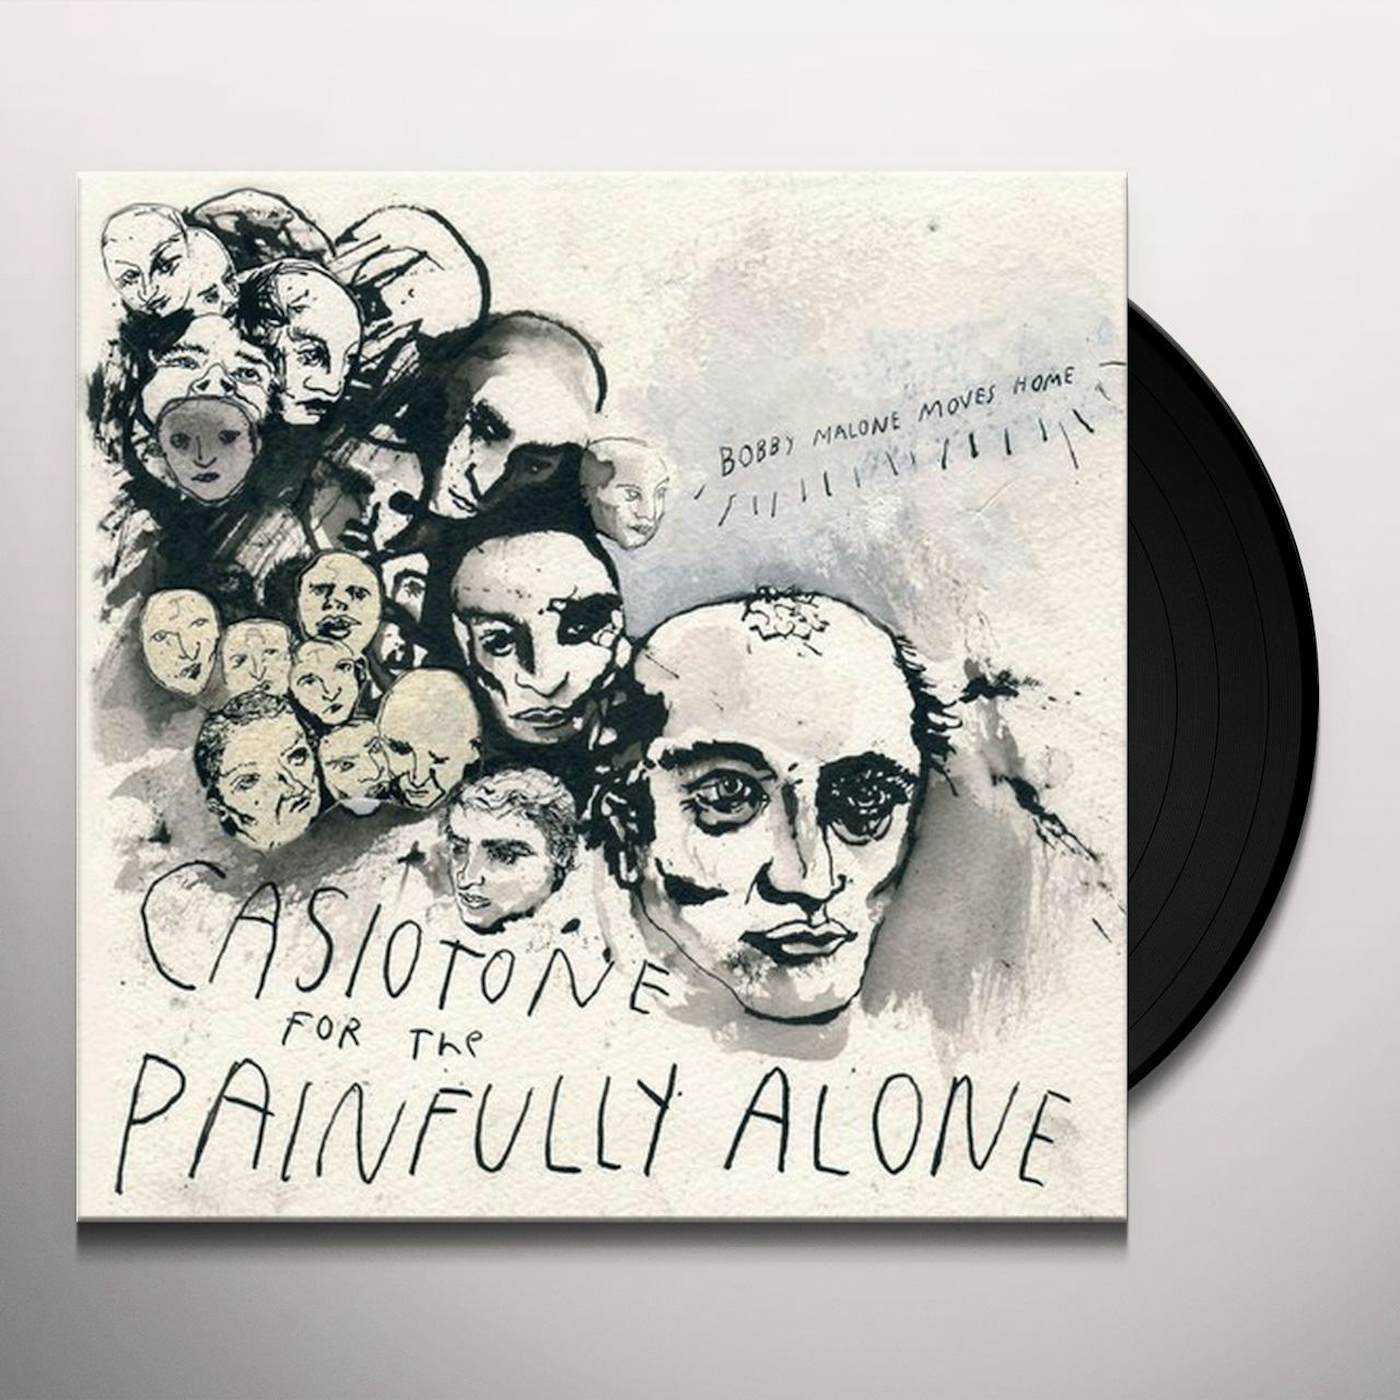 Casiotone For The Painfully Alone BOBBY MALONE MOVES HOME Vinyl Record